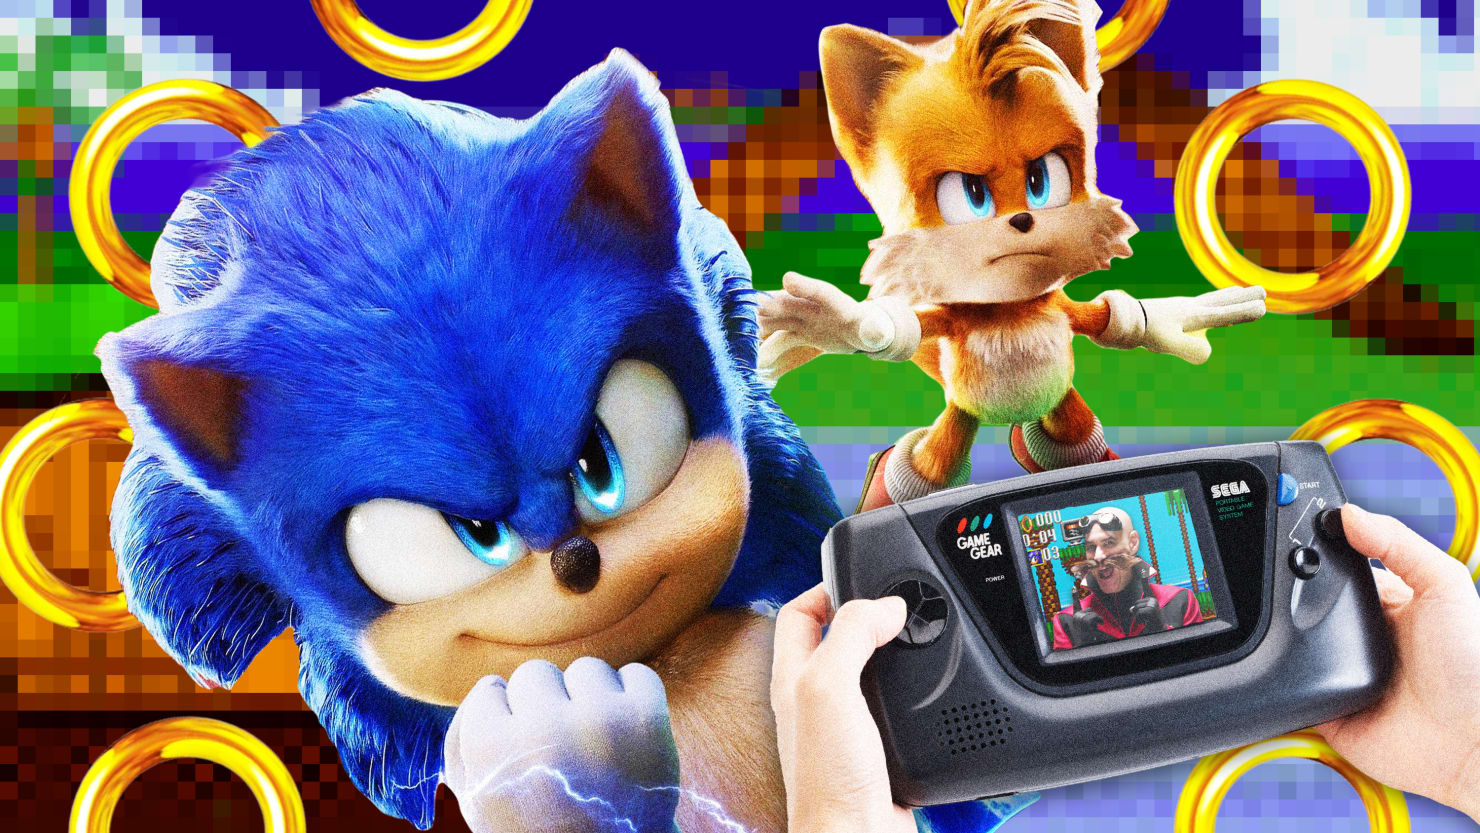 Sonic the Hedgehog 2's best Easter eggs and references